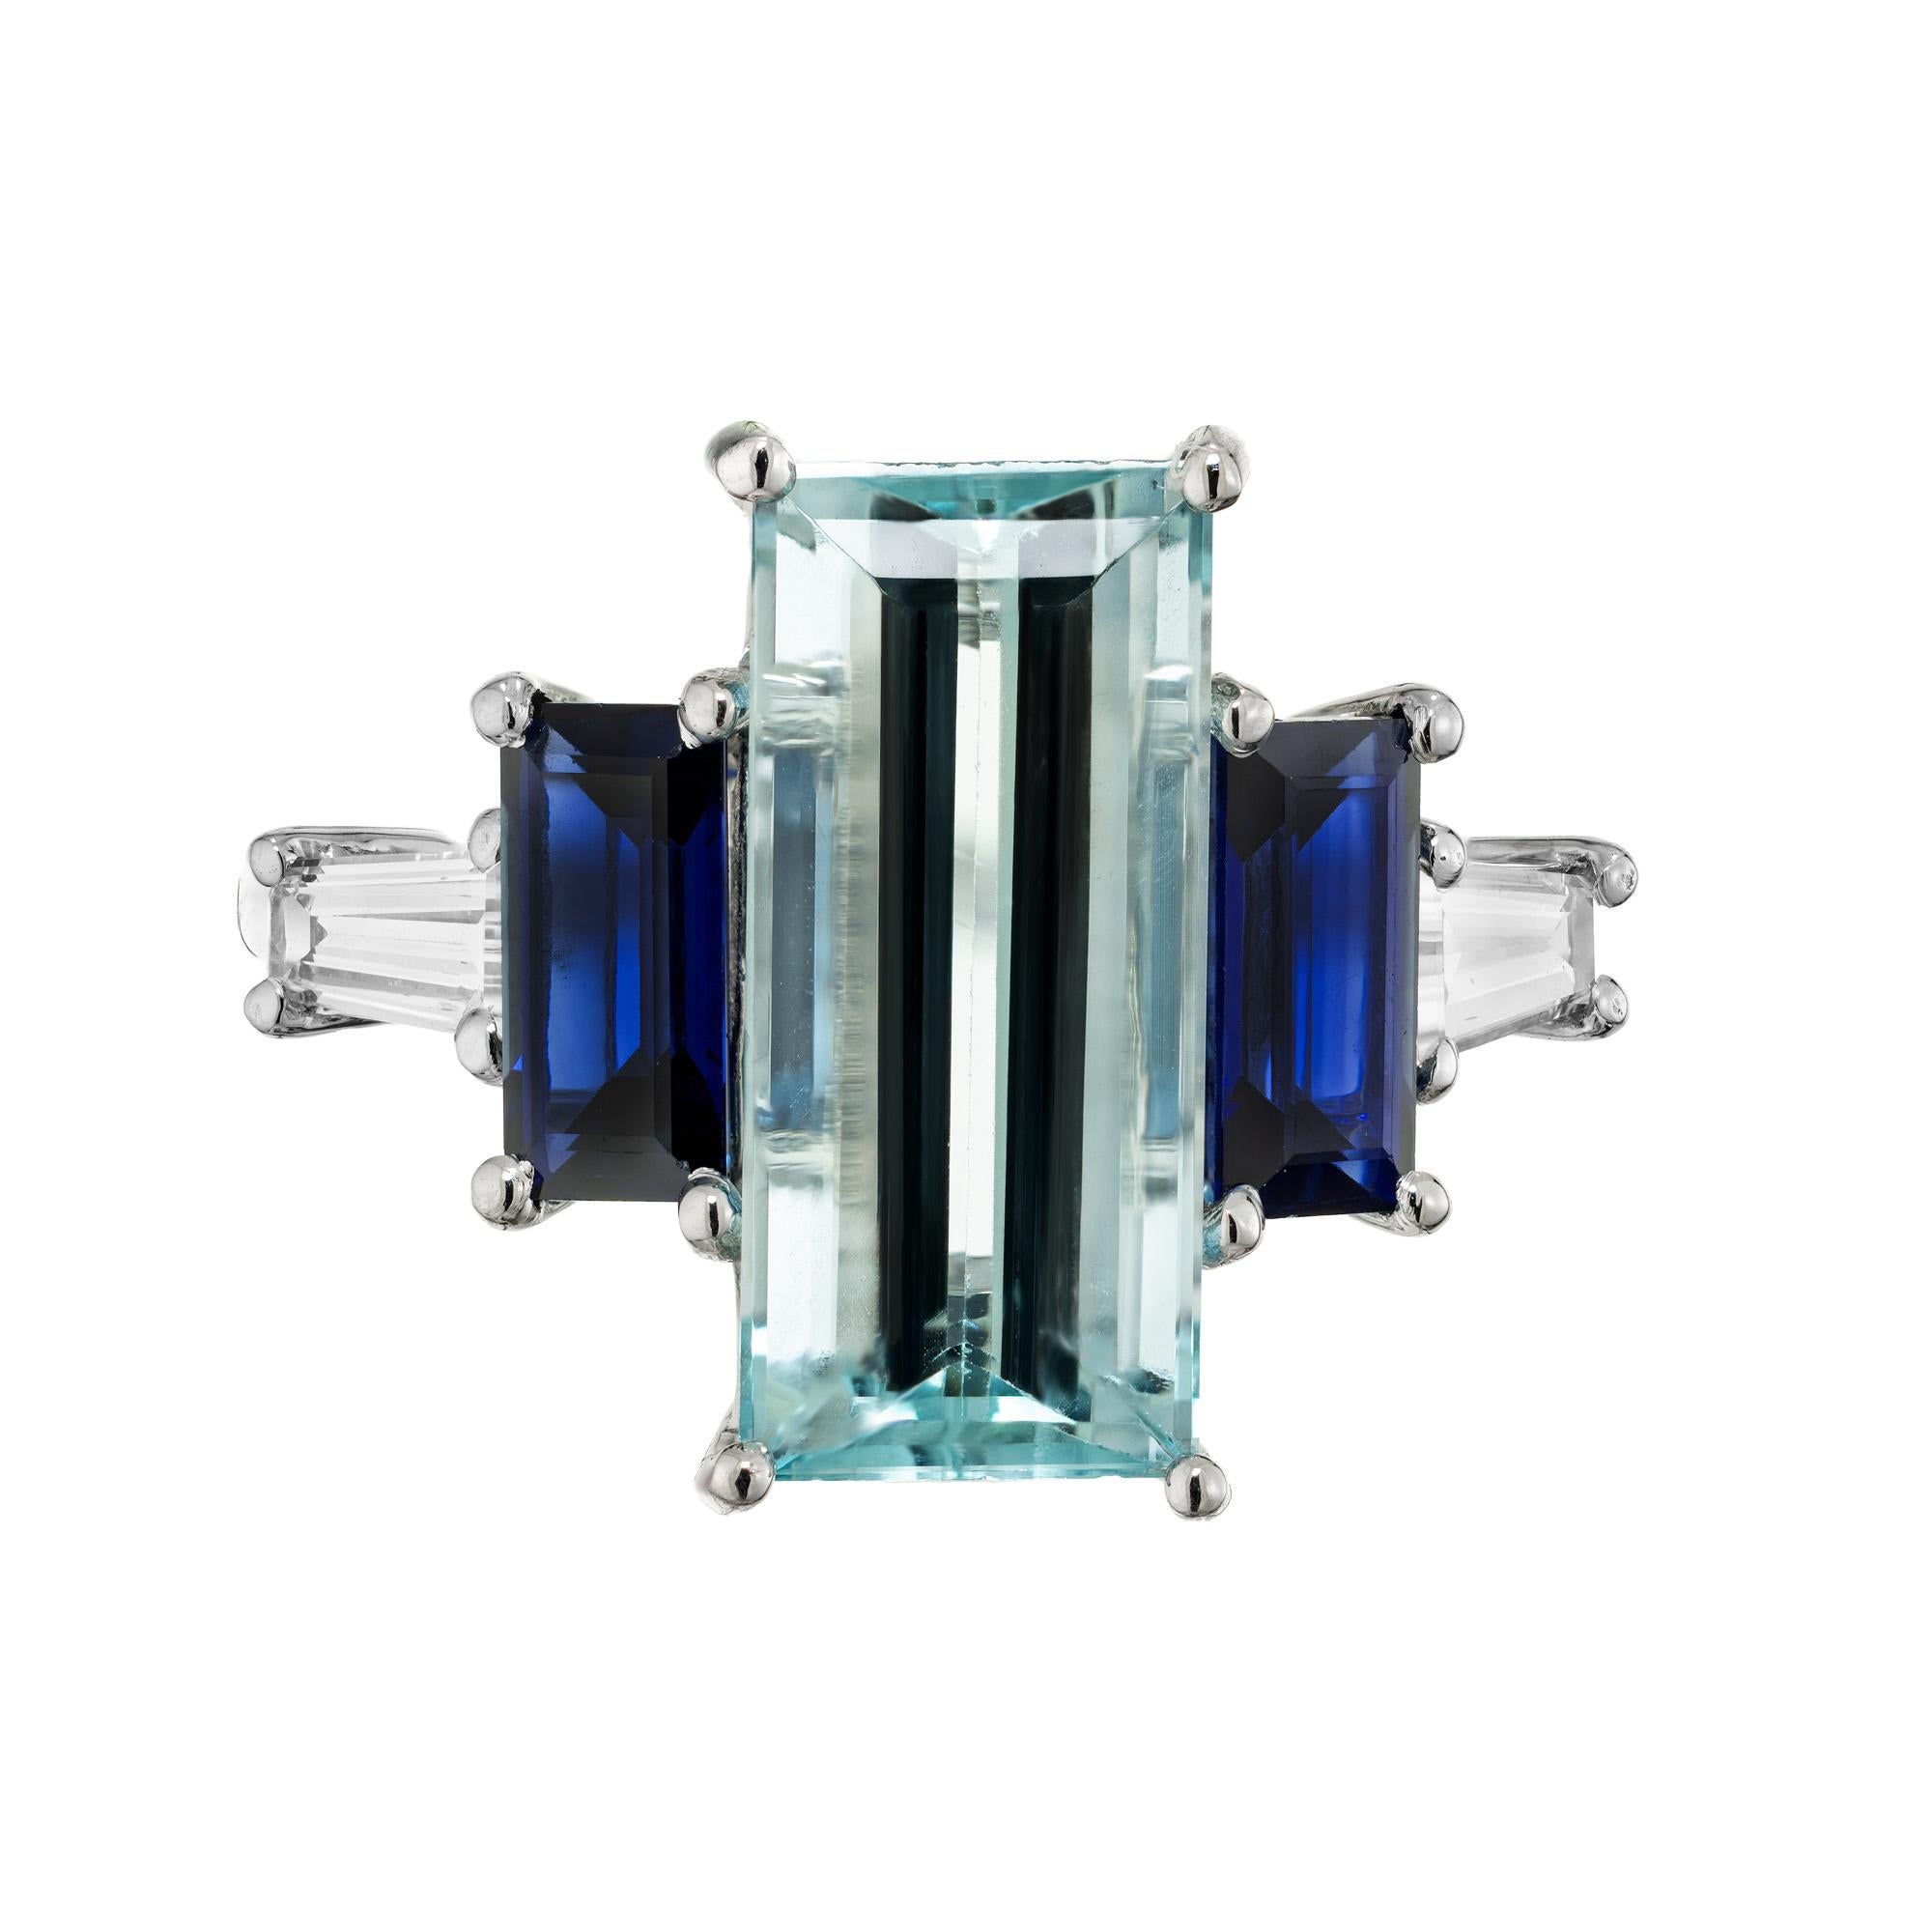 Introducing the exquisite Peter Suchy GIA Certified 1.64 Carat Blue Sapphire Aqua Diamond Platinum Ring. The 3.53ct rectangular Aquamarine center stone is mounted in a platinum setting and accented by 2 GIA certified emerald cut sapphires totaling